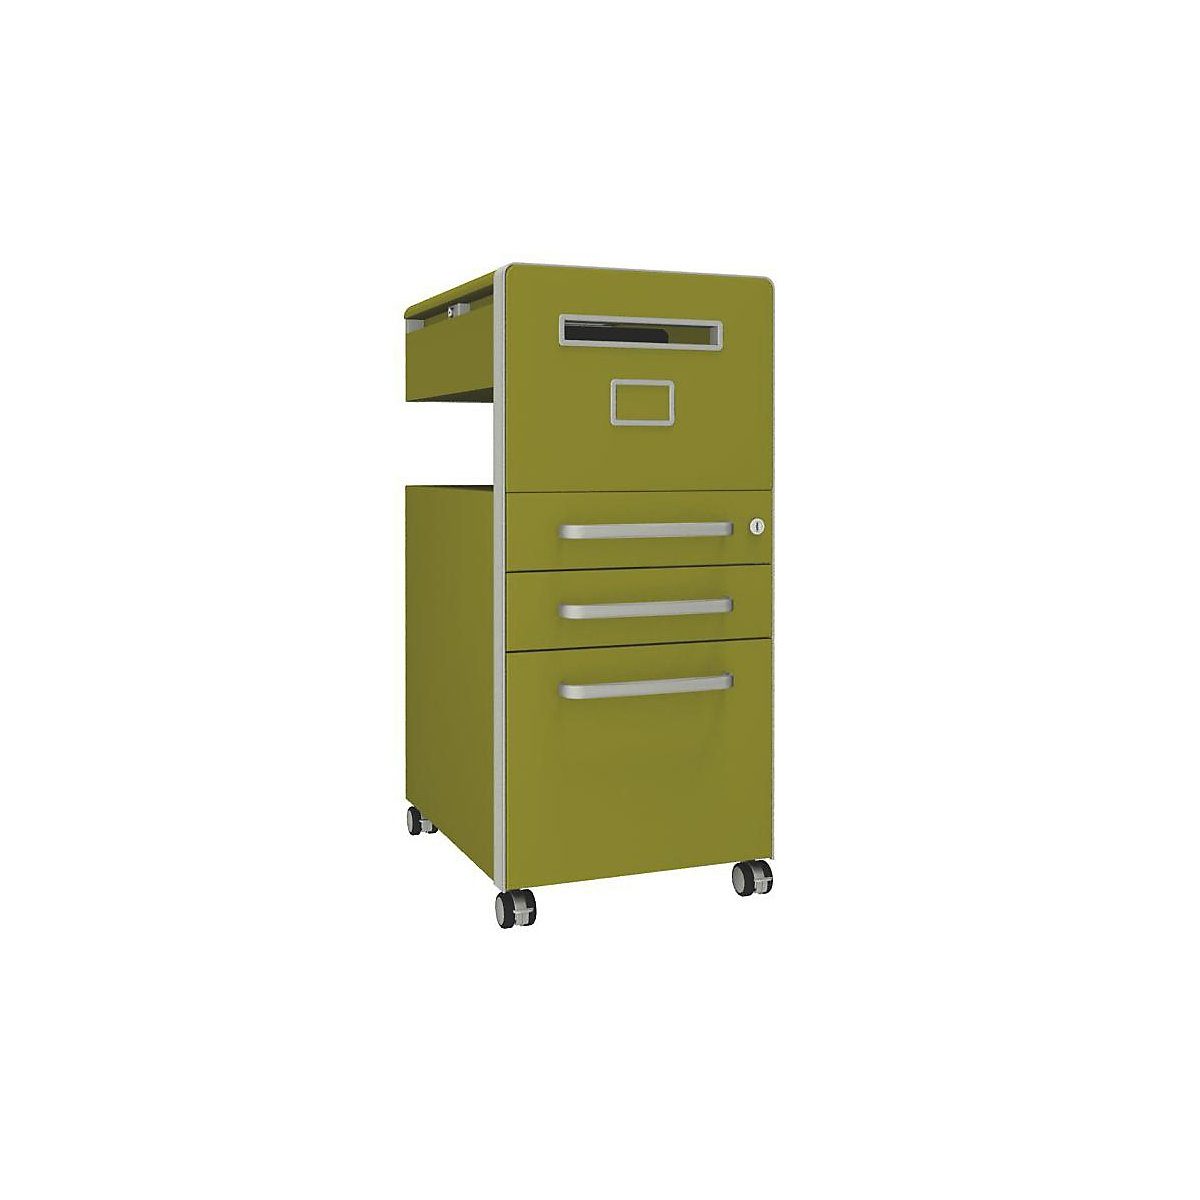 Bite™ pedestal furniture, with 1 whiteboard, opens on the right side – BISLEY, with 2 universal drawers, 1 suspension file drawer, tickleweed-18